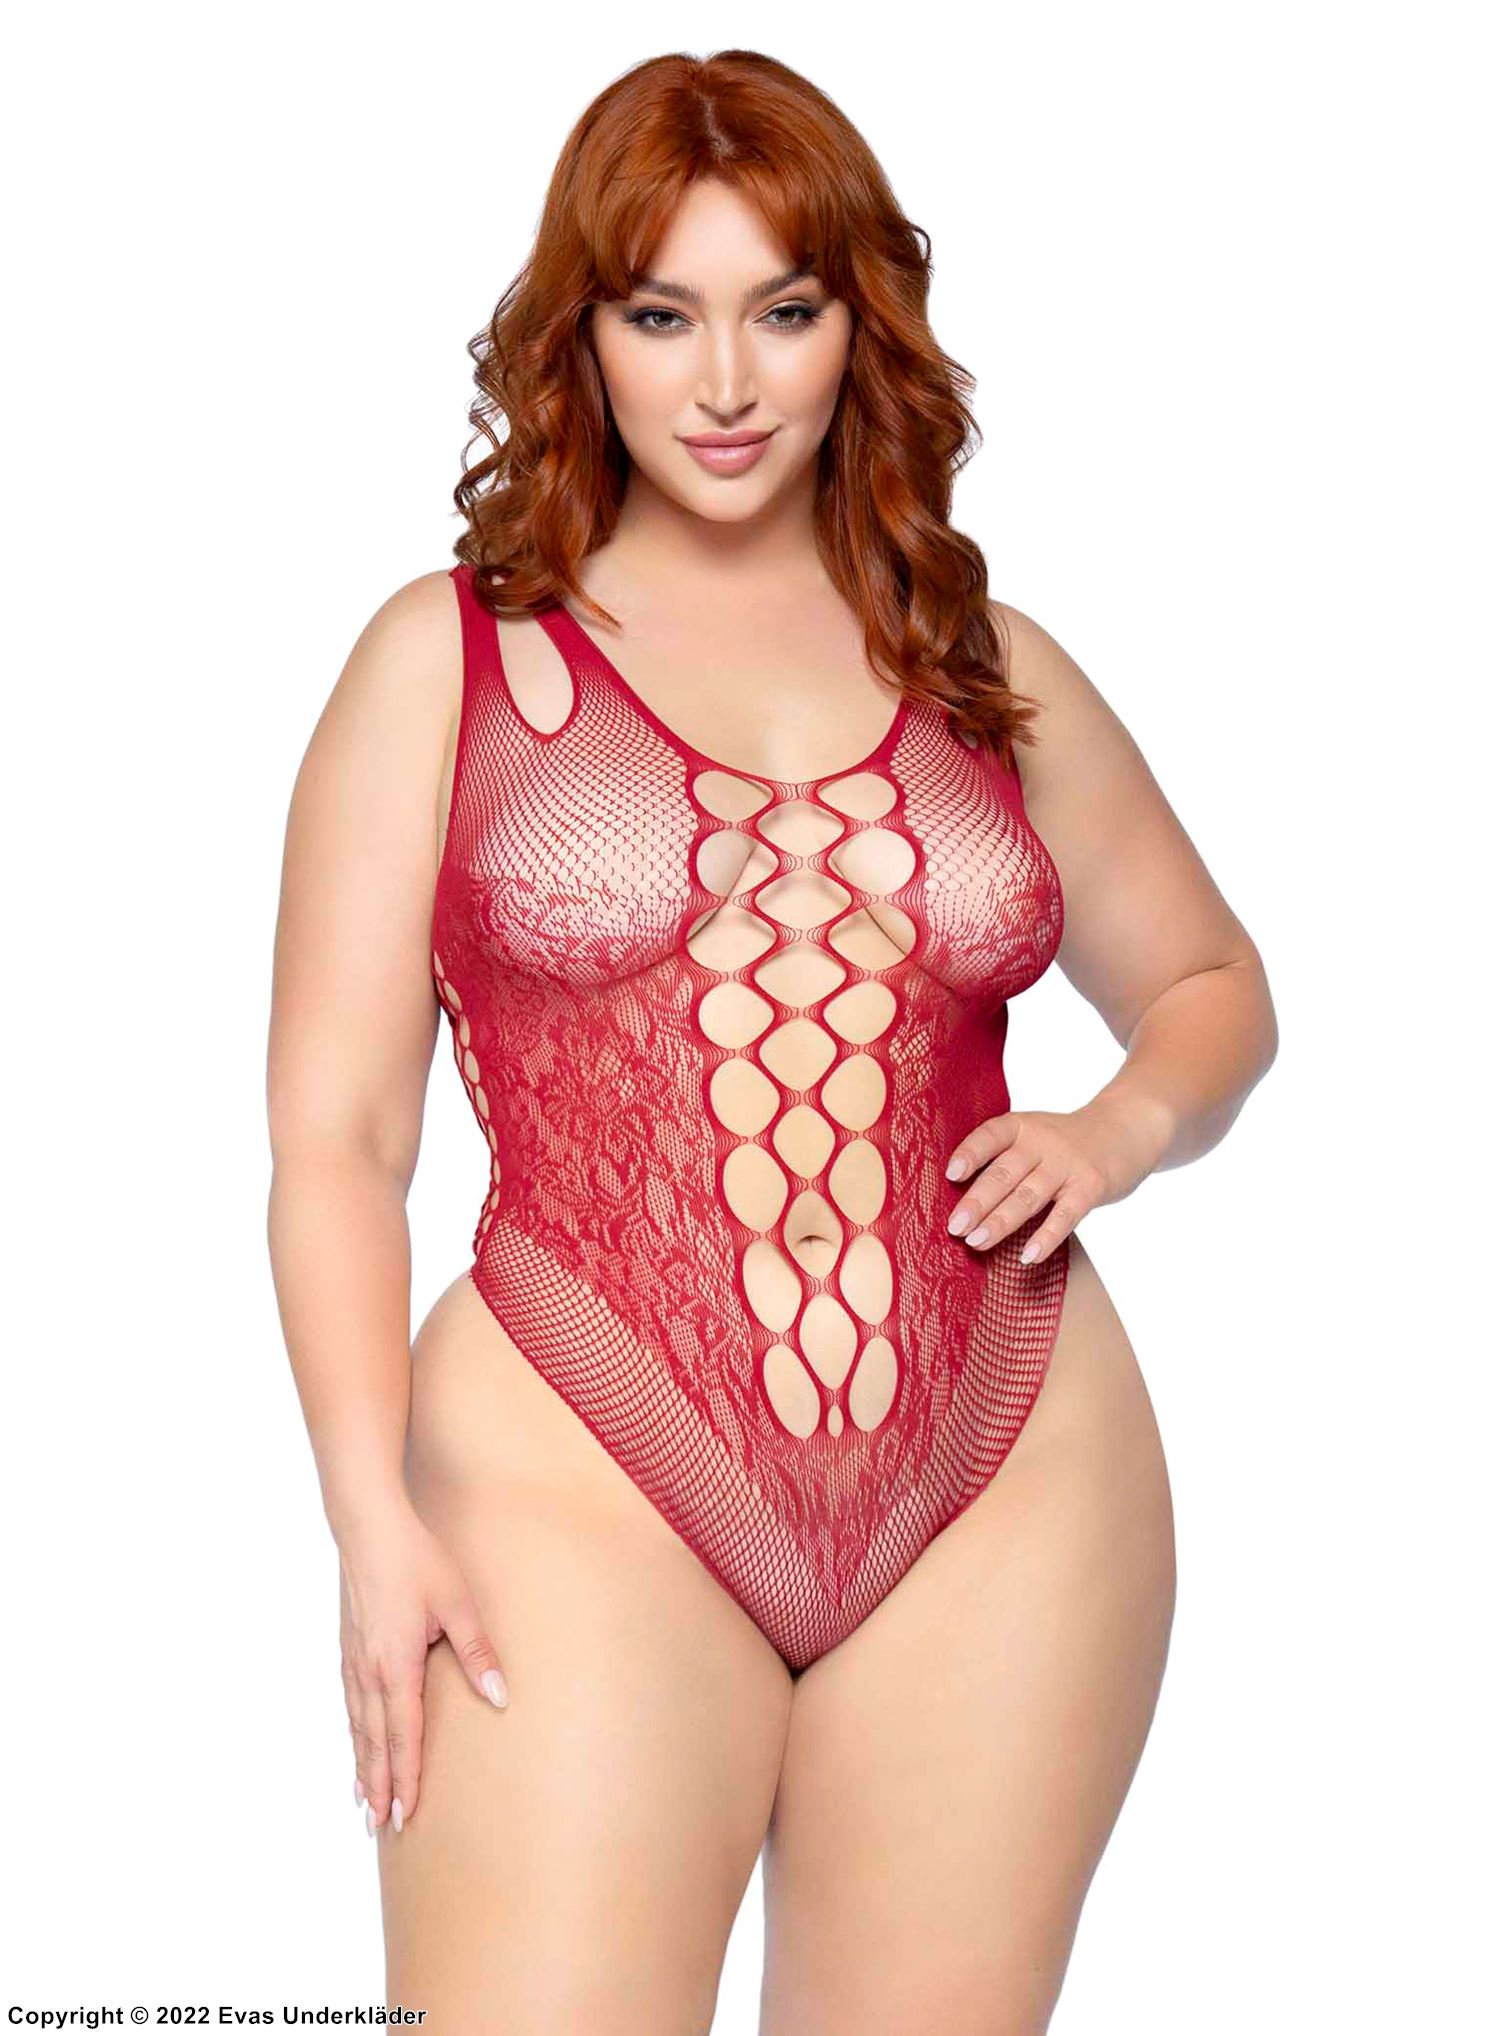 Patterned body, stretch net, seamless, lace details, double straps, plus size